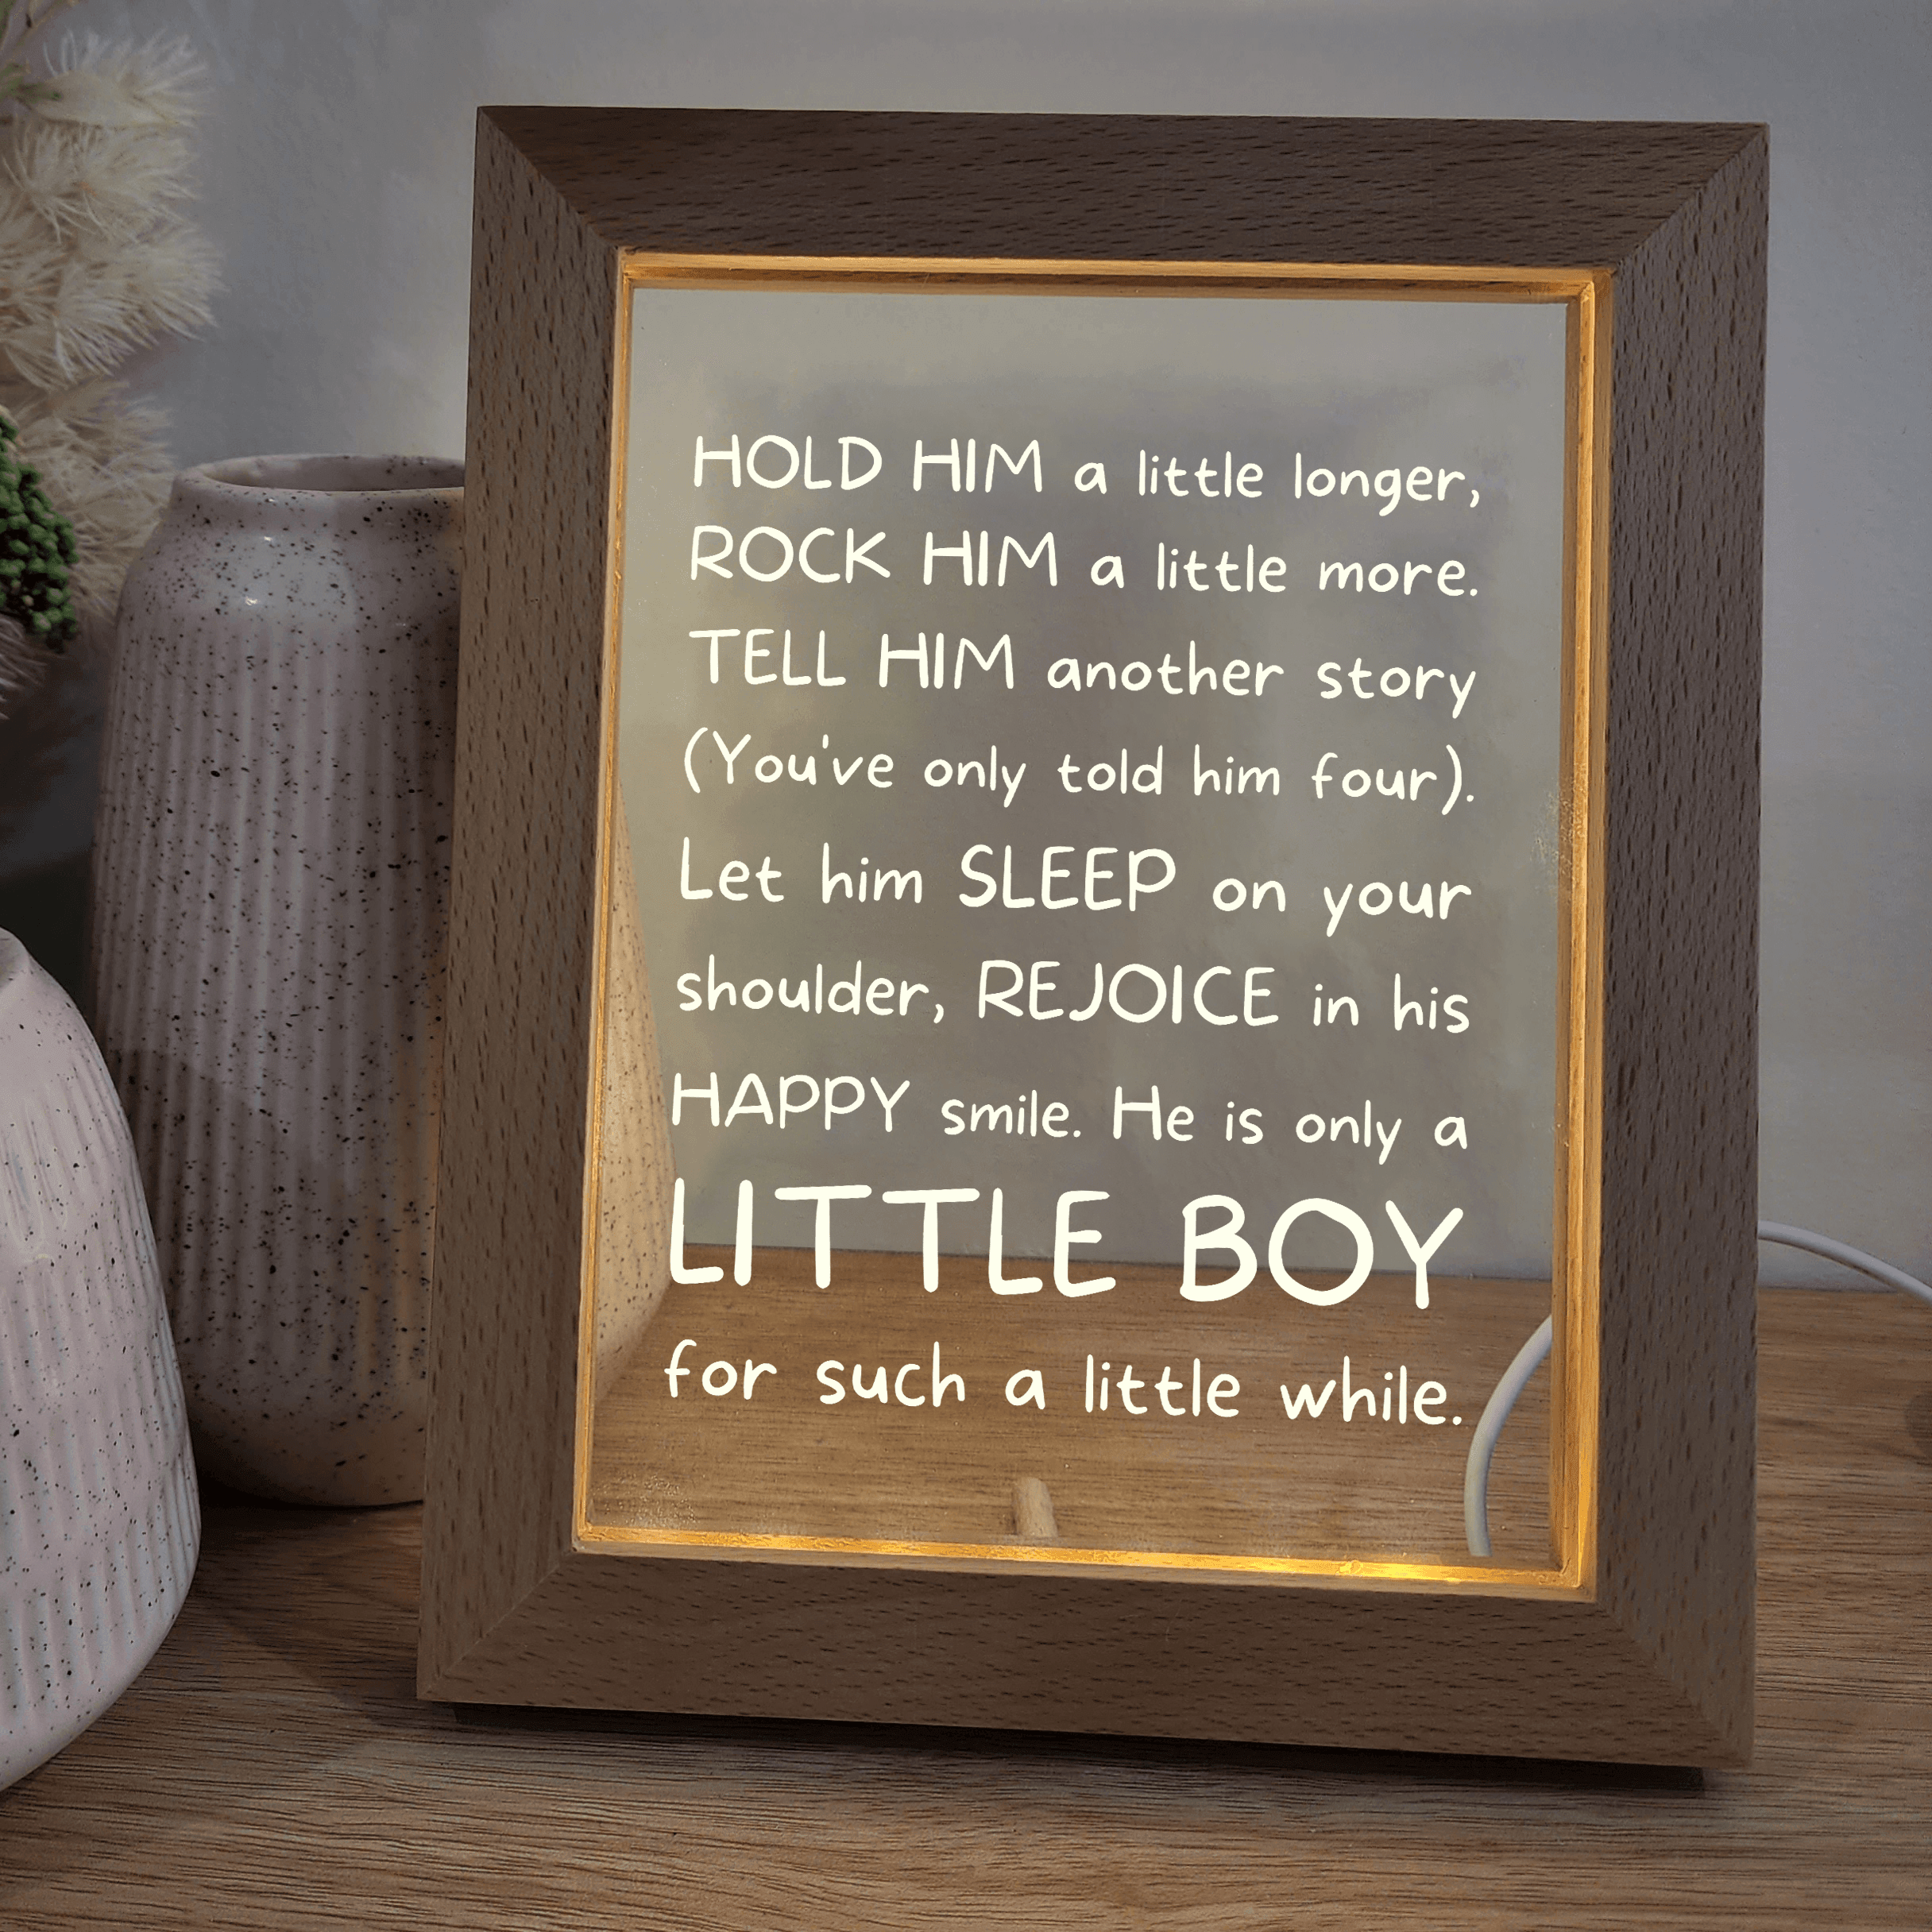 Timber Night Light Frame 🌙 - Quote - Hold Him a Little Longer - The Willow Corner